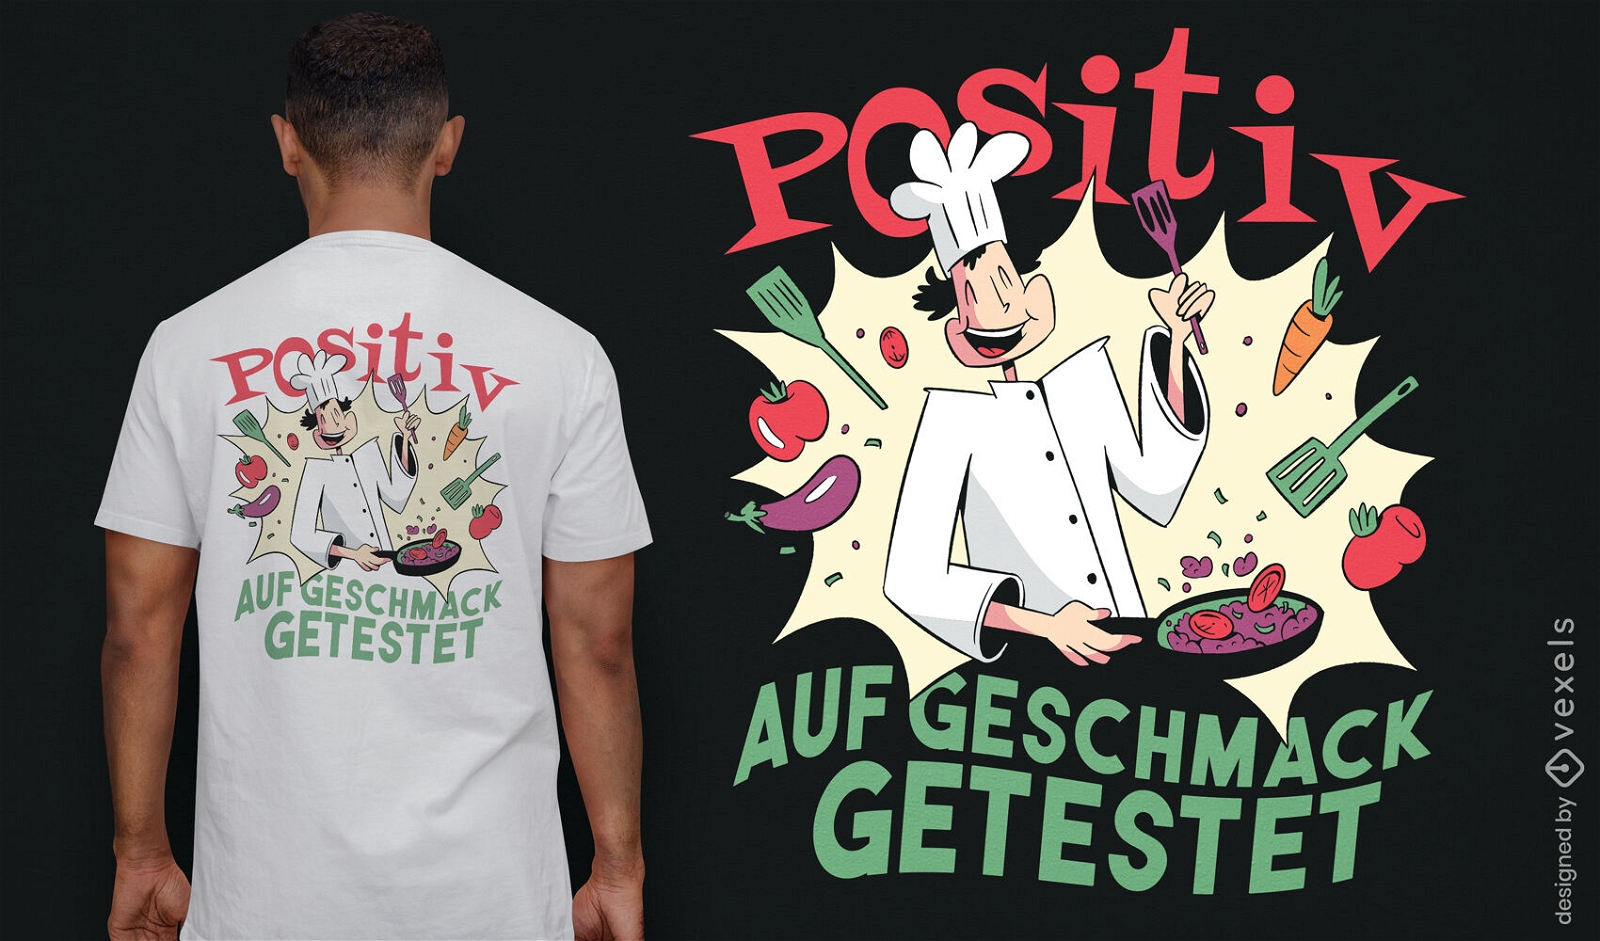 Chef cooking quote t-shirt design